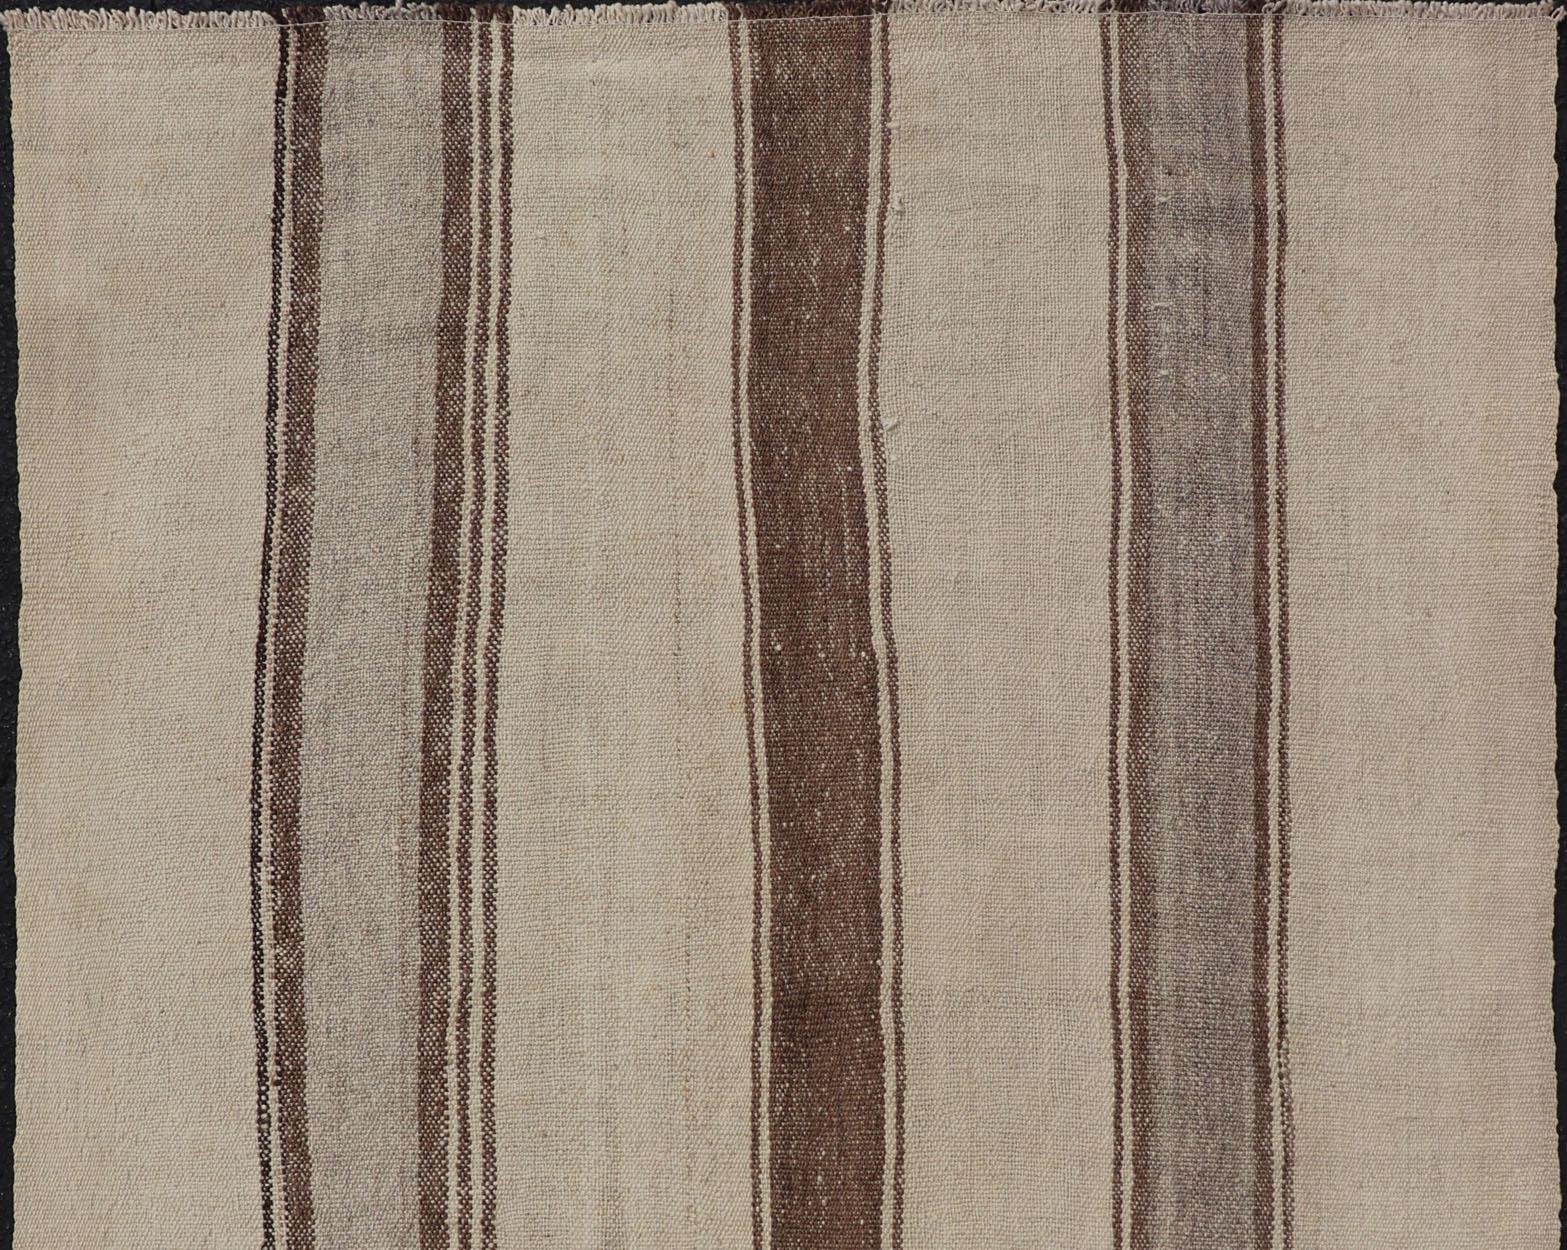 Vintage Turkish Kilim with Vertical Stripes in Tan, Taupe, Grey, Cream and Brown For Sale 2